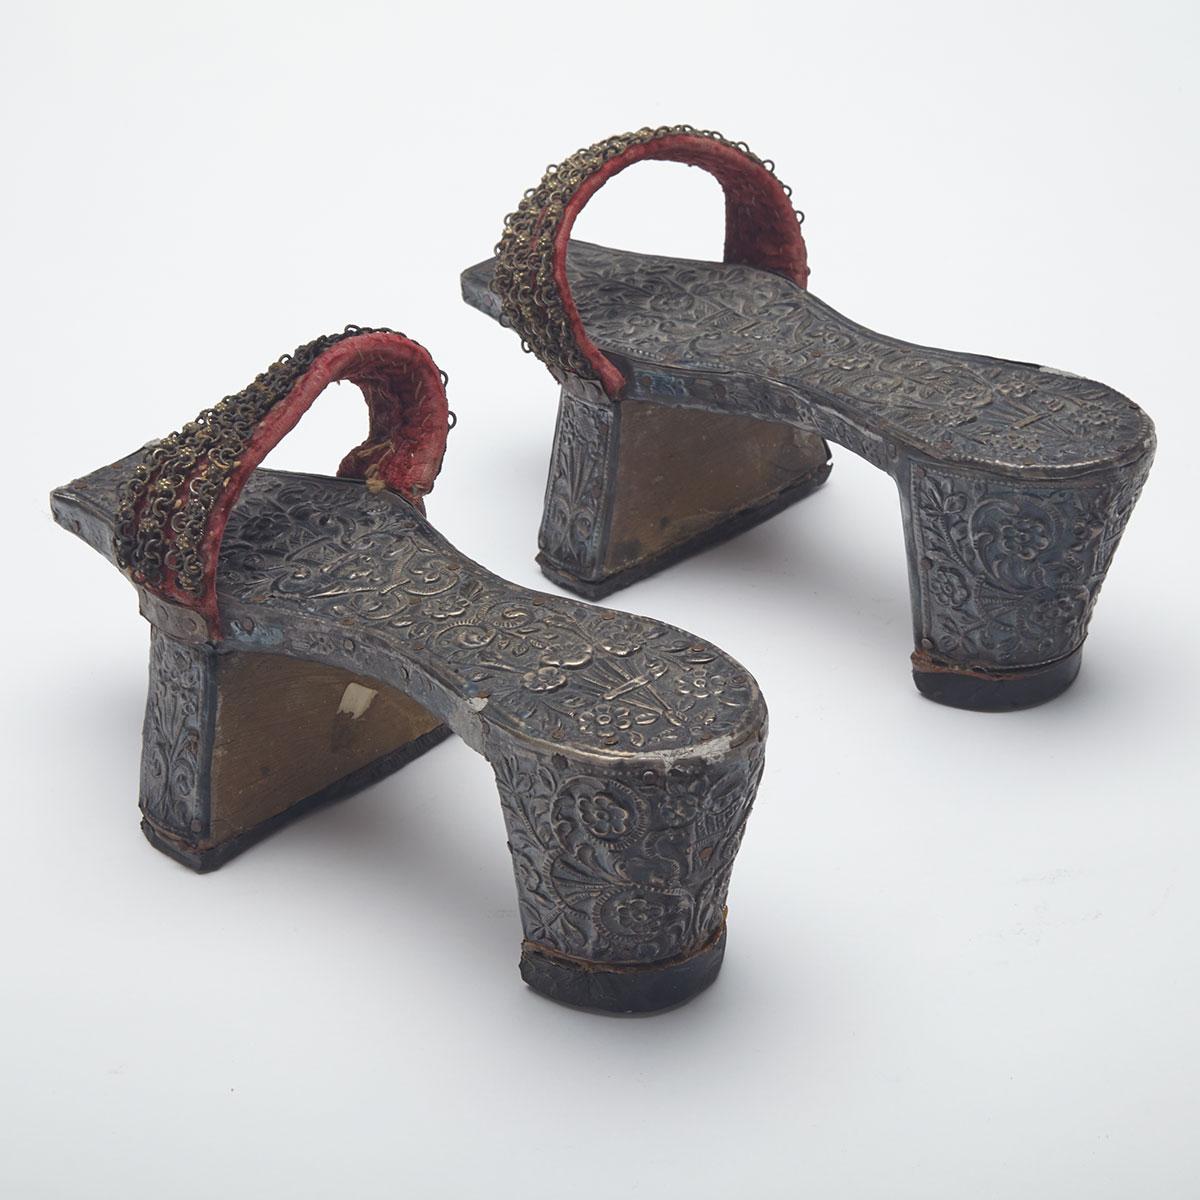 Pair of Silvered Shoes, Ottoman, 19th Century